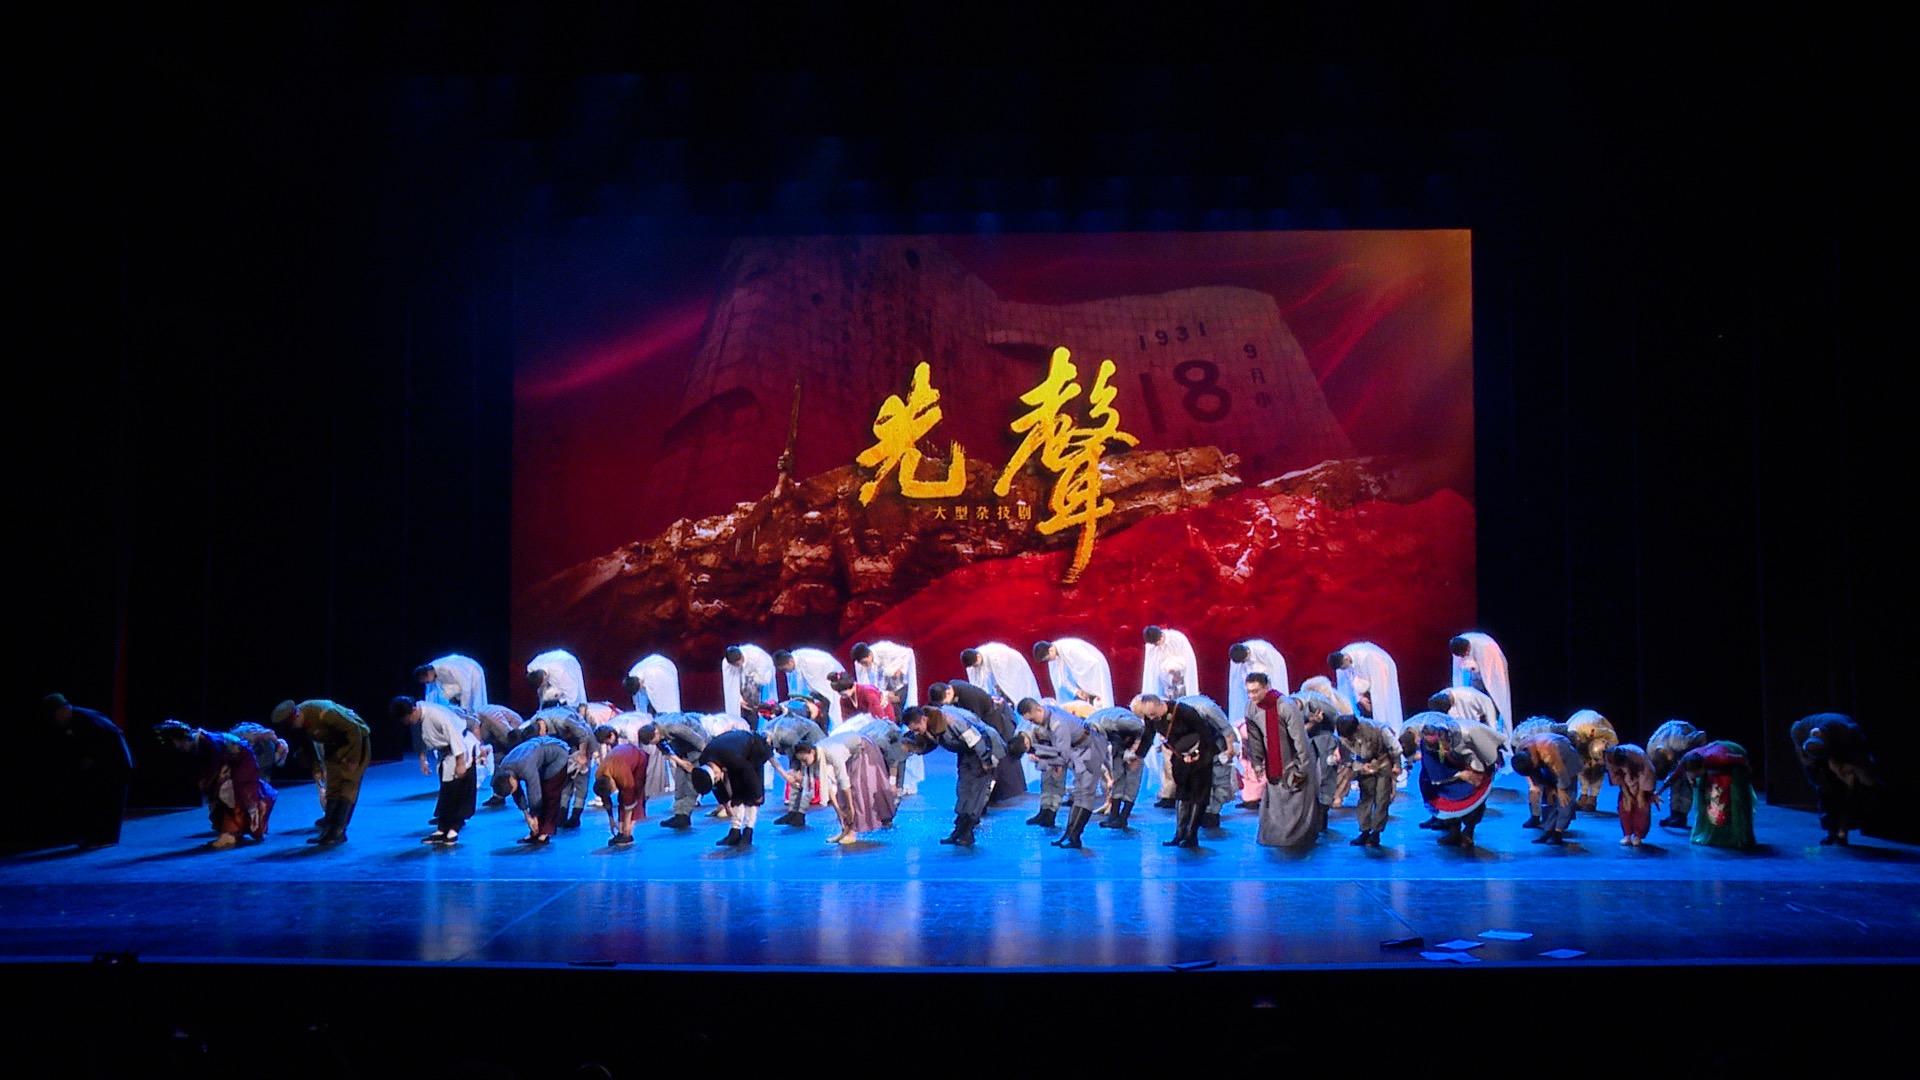 A recent stage performance by the Shenyang acrobatic troupe suggests a renewed interest in narratives related to the September 18 Incident. /CGTN